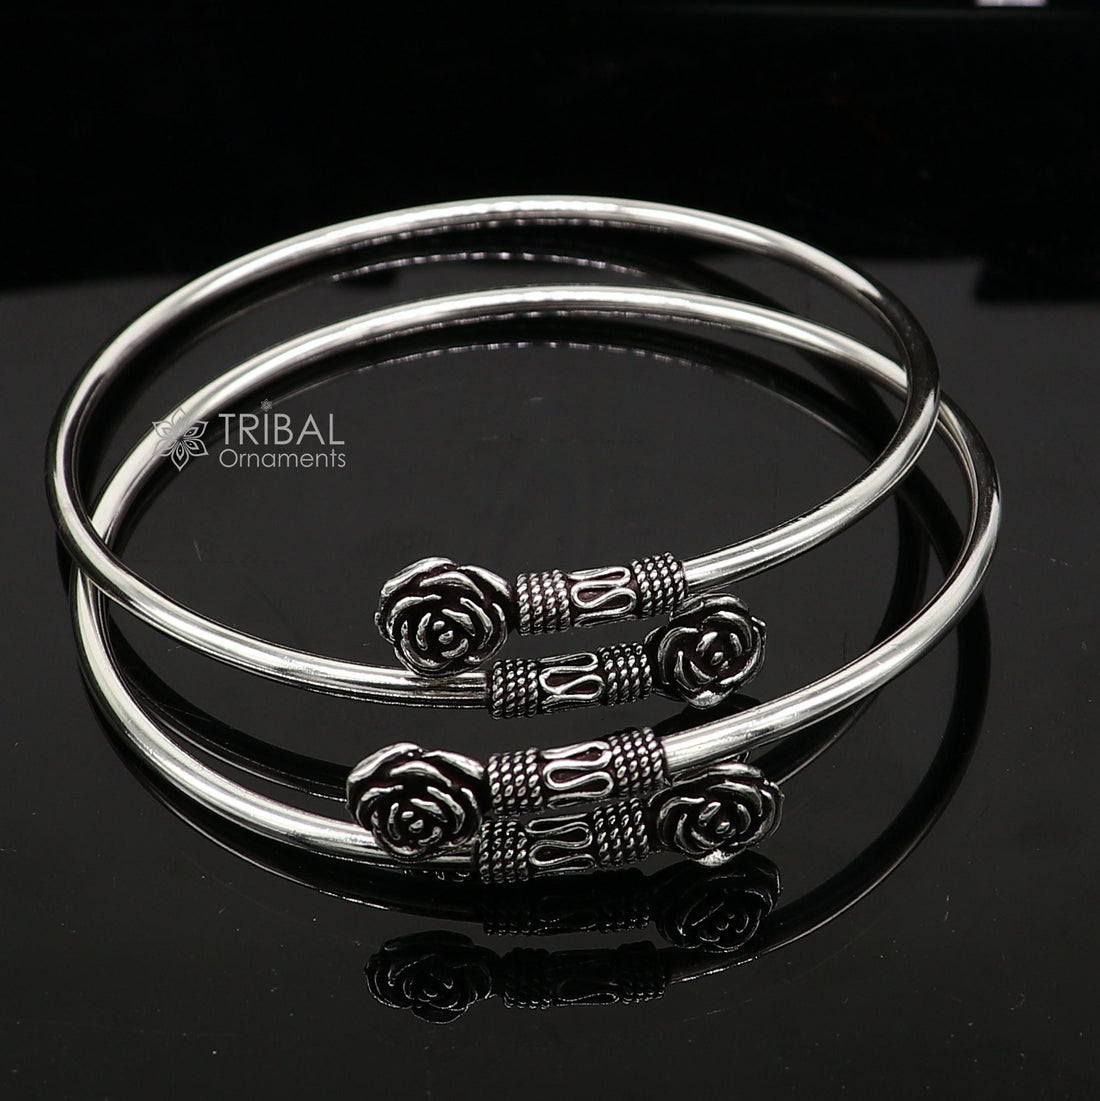 Trendy cultural 925 sterling silver handmade fabulous foot anklet kada/anklet amazing rose flower design tribal ethnic jewelry india nsfk103 - TRIBAL ORNAMENTS